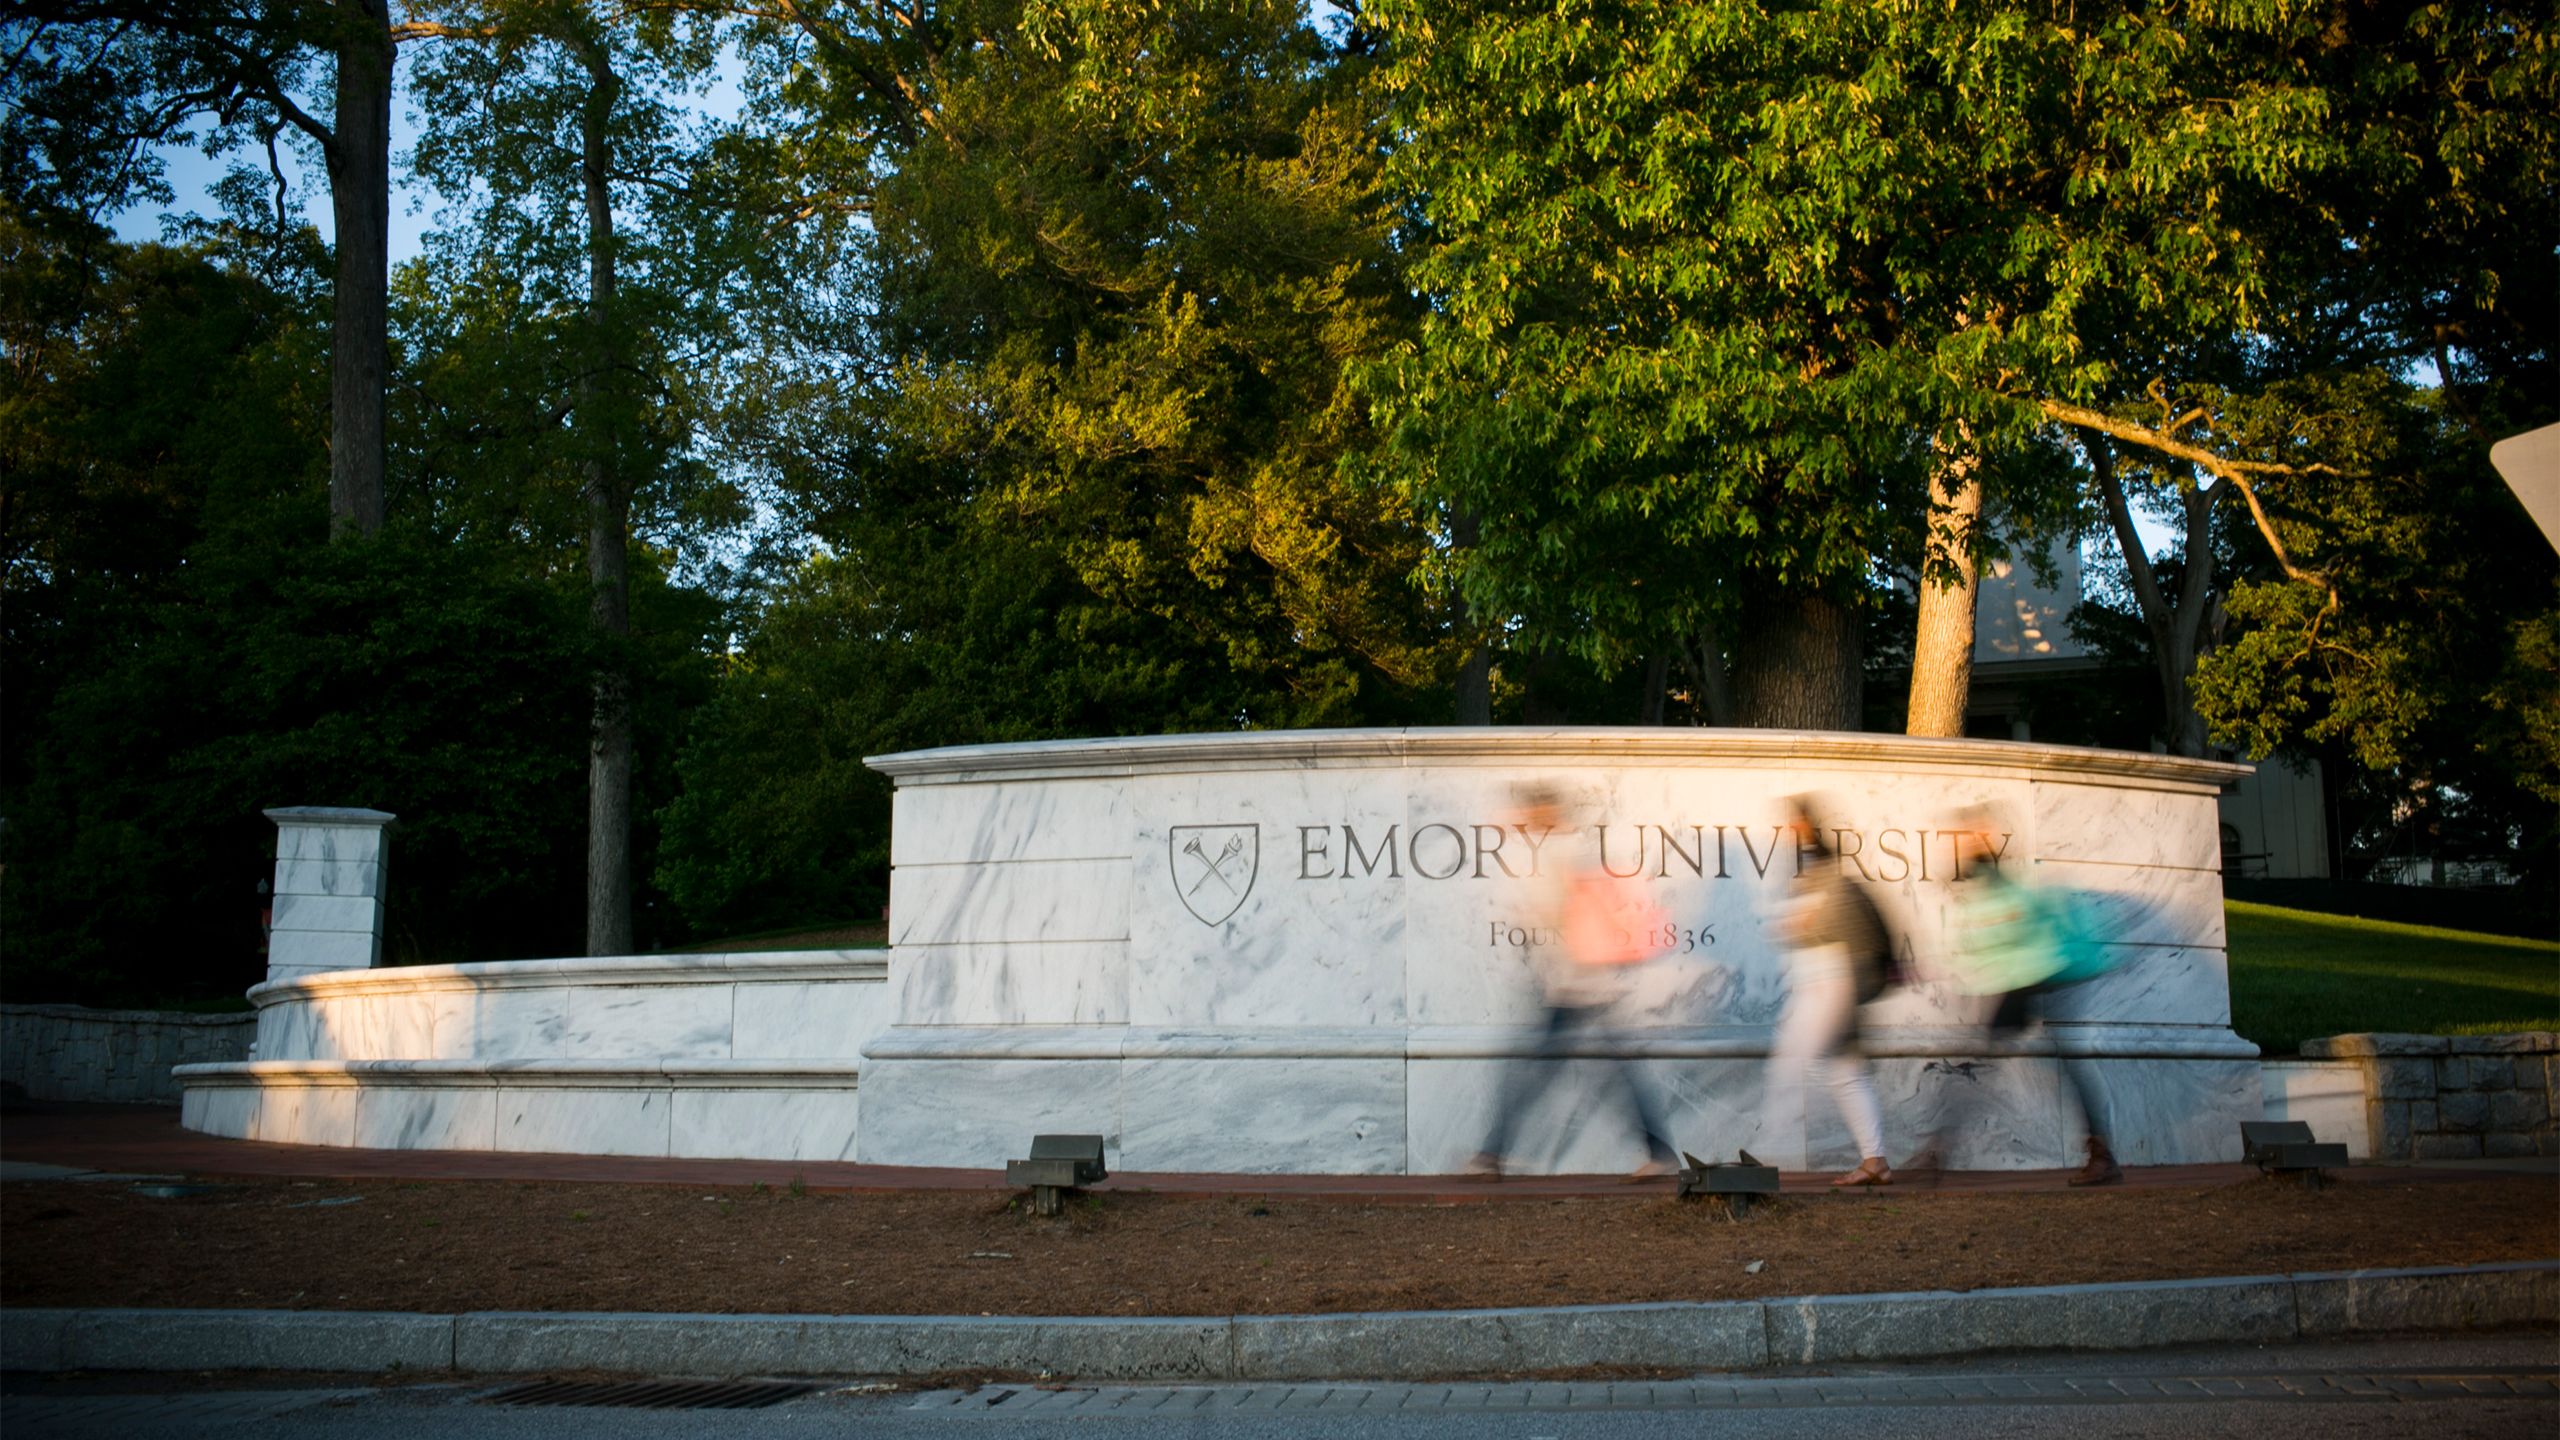 Students walk in front of the white wall that says "Emory University" at the main gate to campus